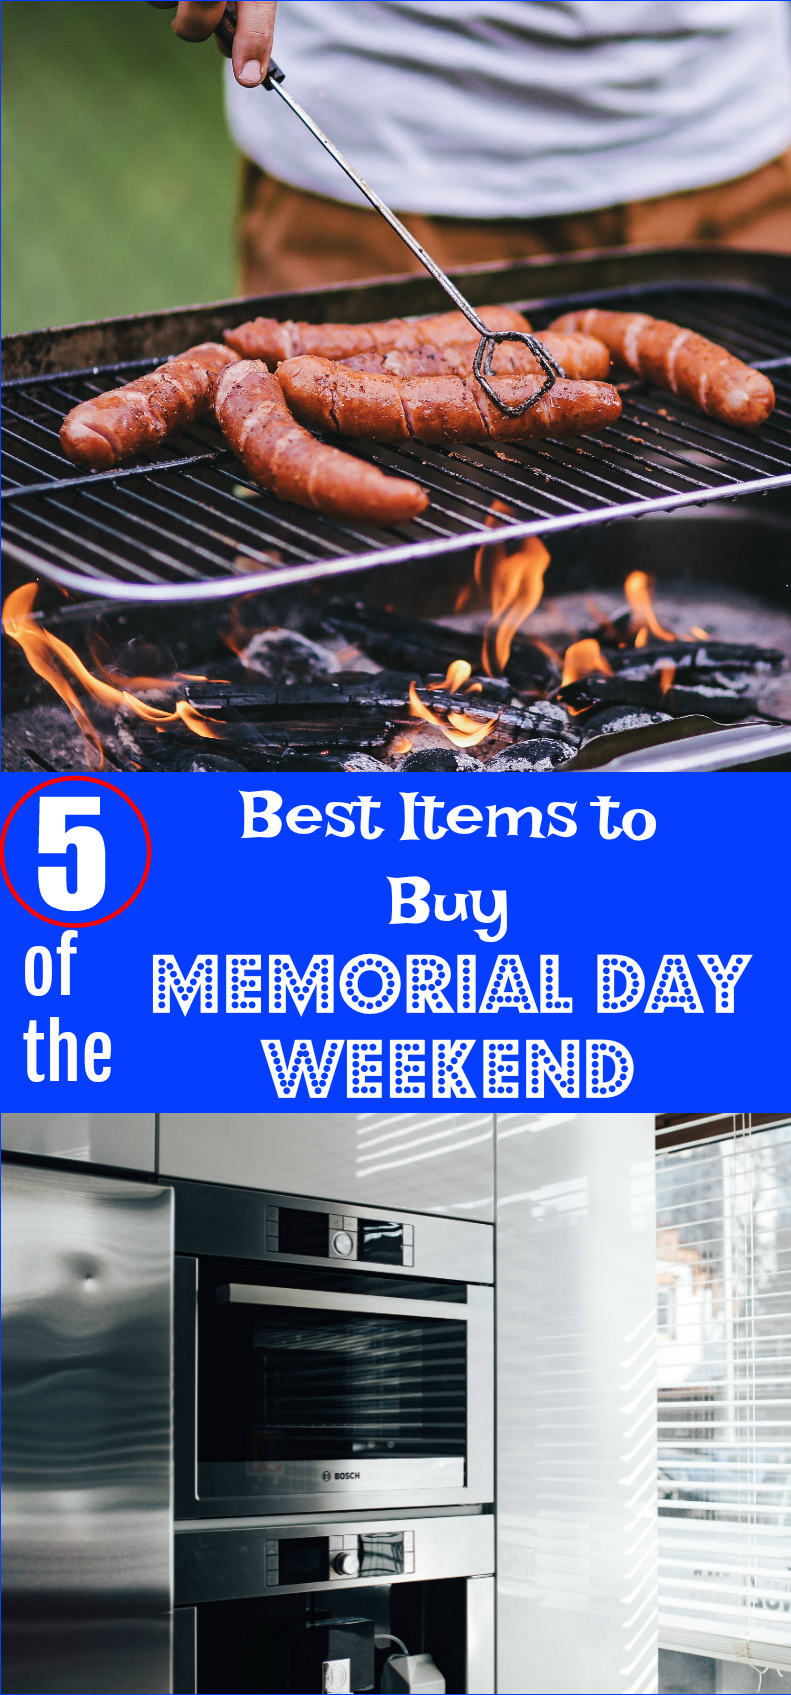 5 of the Best Items to Buy Memorial Day Weekend